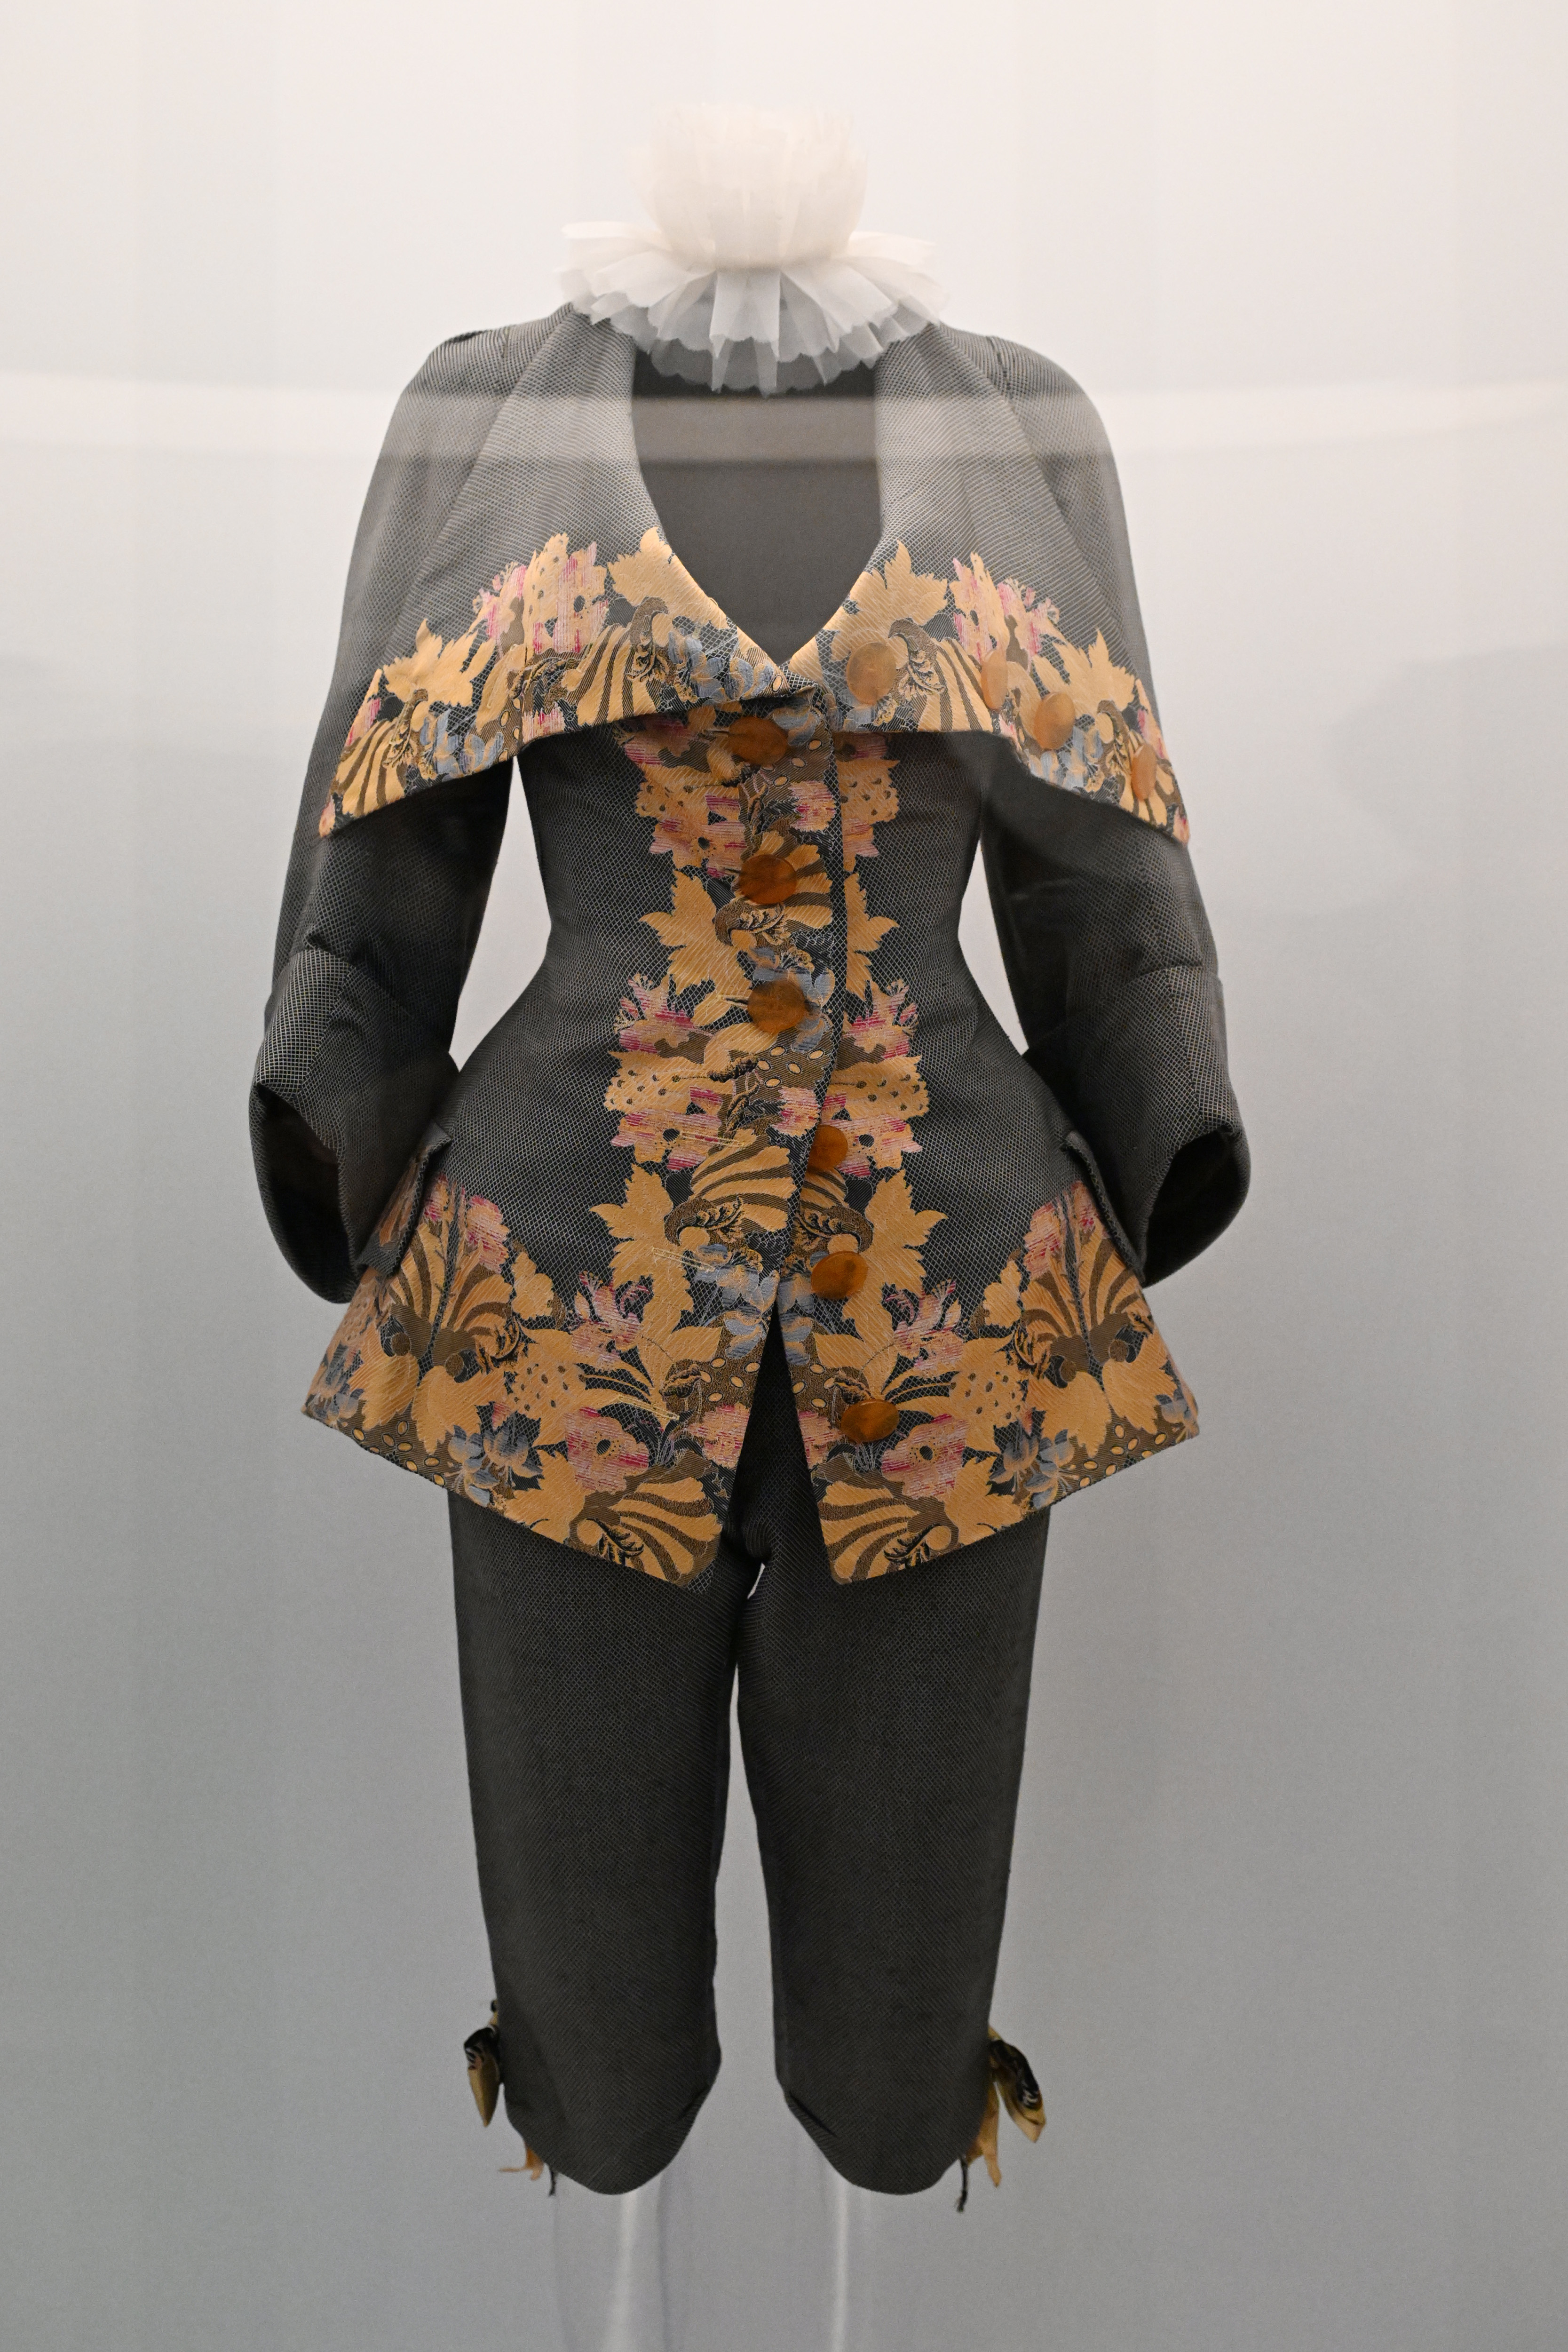 Vintage-style mannequin displaying a tailored jacket with floral accents and matching breeches